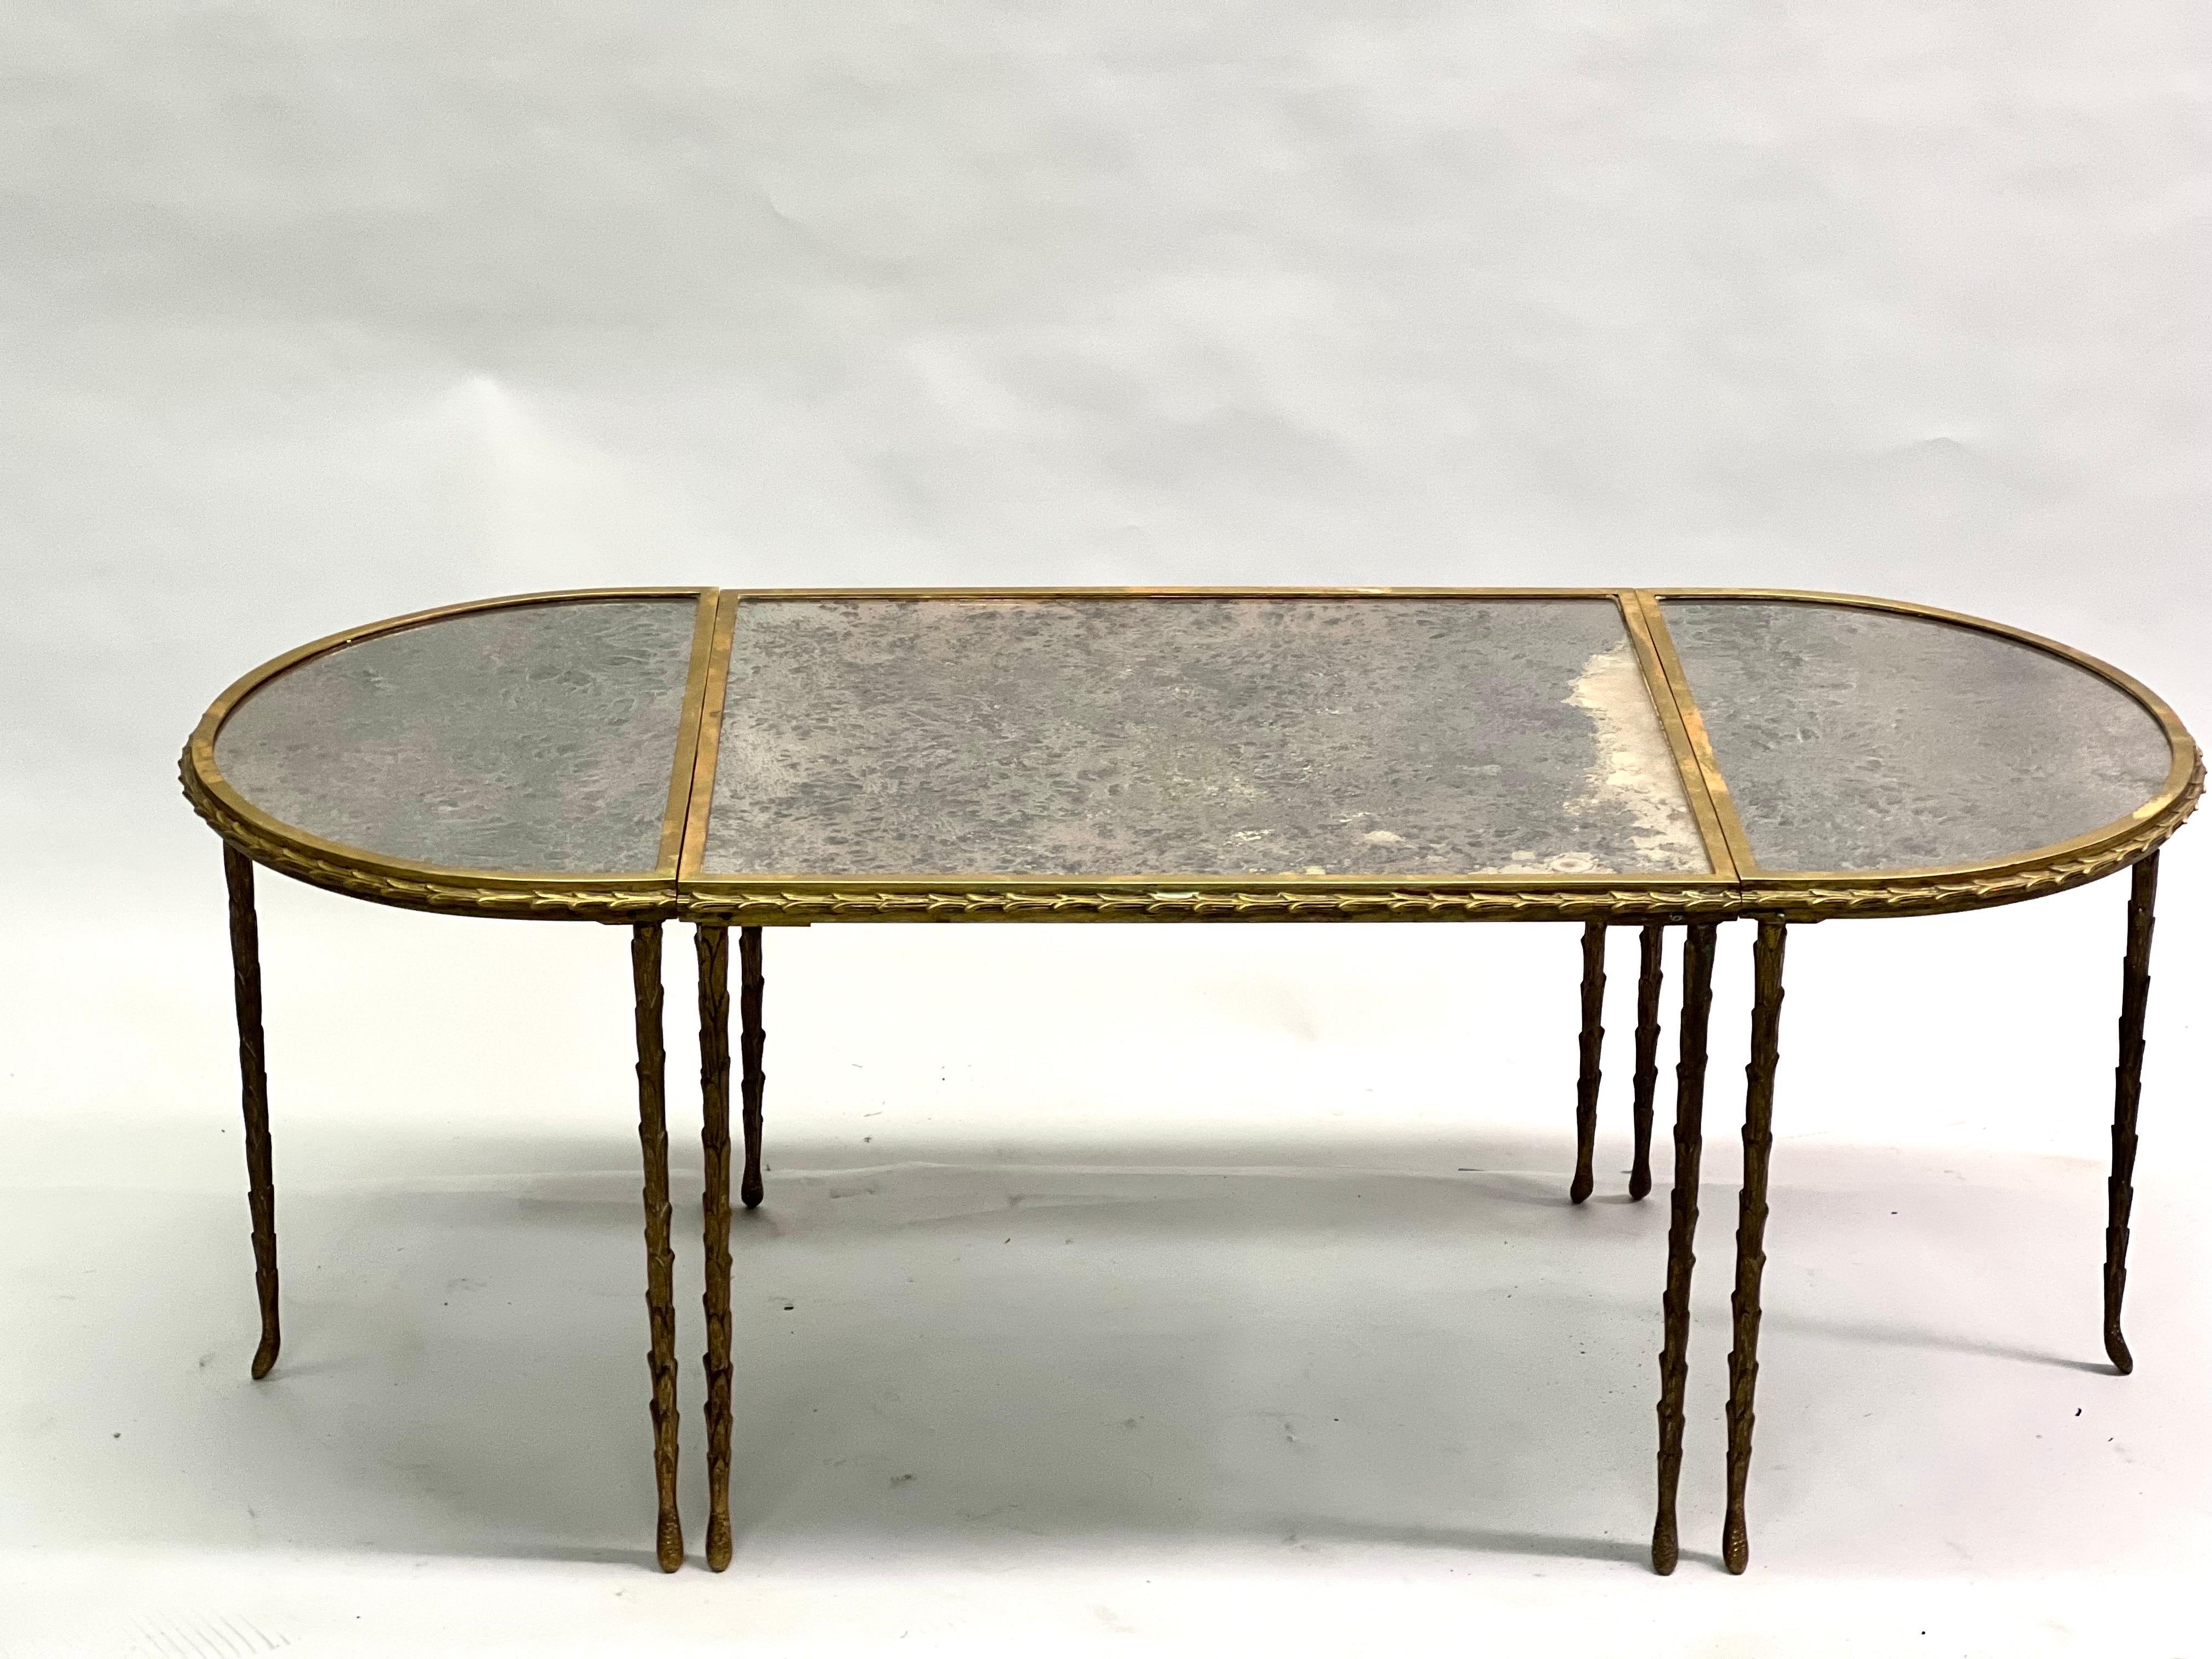 Elegant and Timeless French Mid-Century Modern neoclassical cocktail table by Maison Bagues in gilt solid bronze composed of one center table and two semi-circular end tables. The pieces are cast in bronze in the form of Palm Fronds and covered with